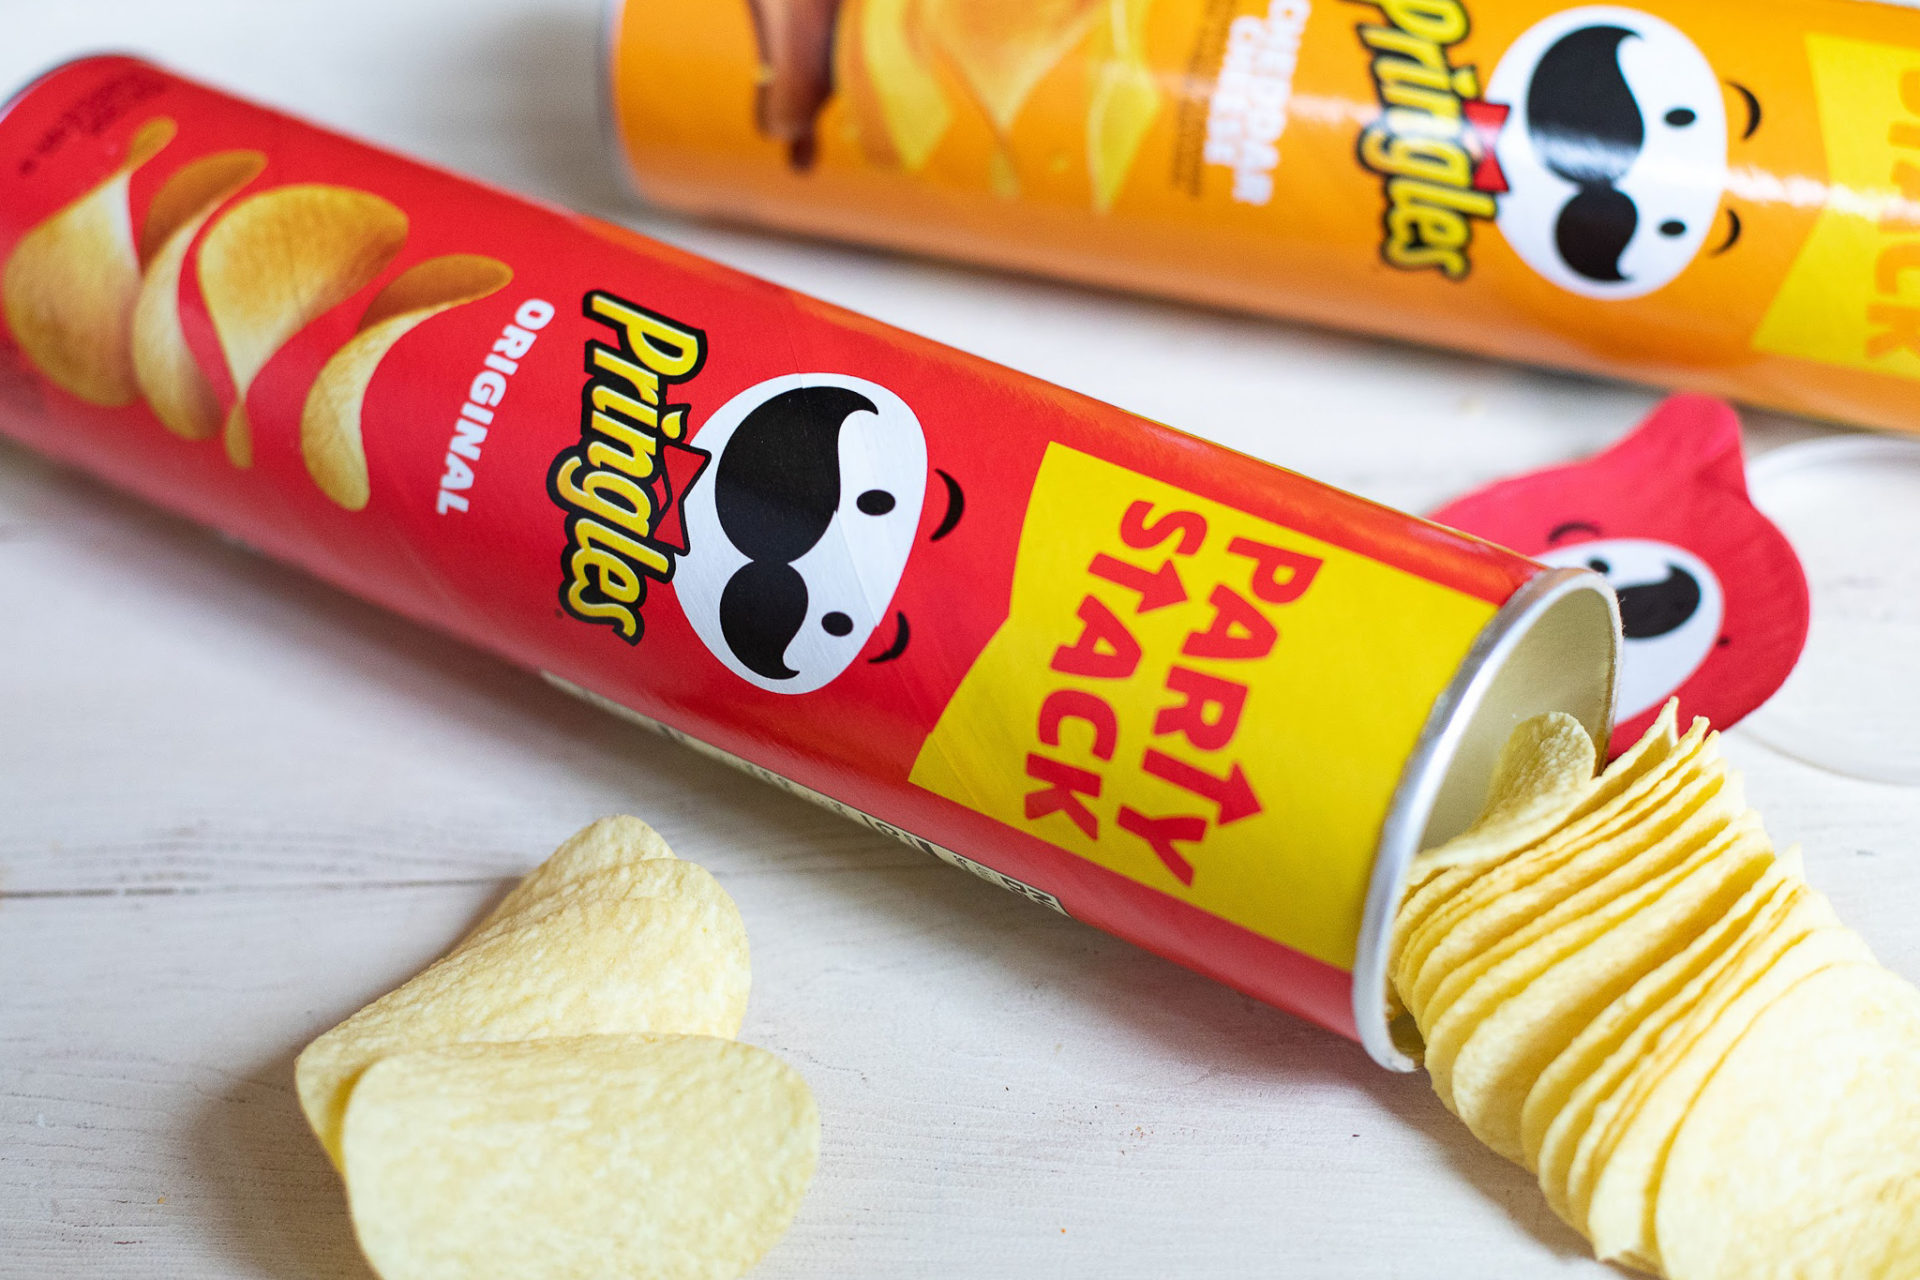 Pringles Party Stack As Low As $1.29 At Kroger